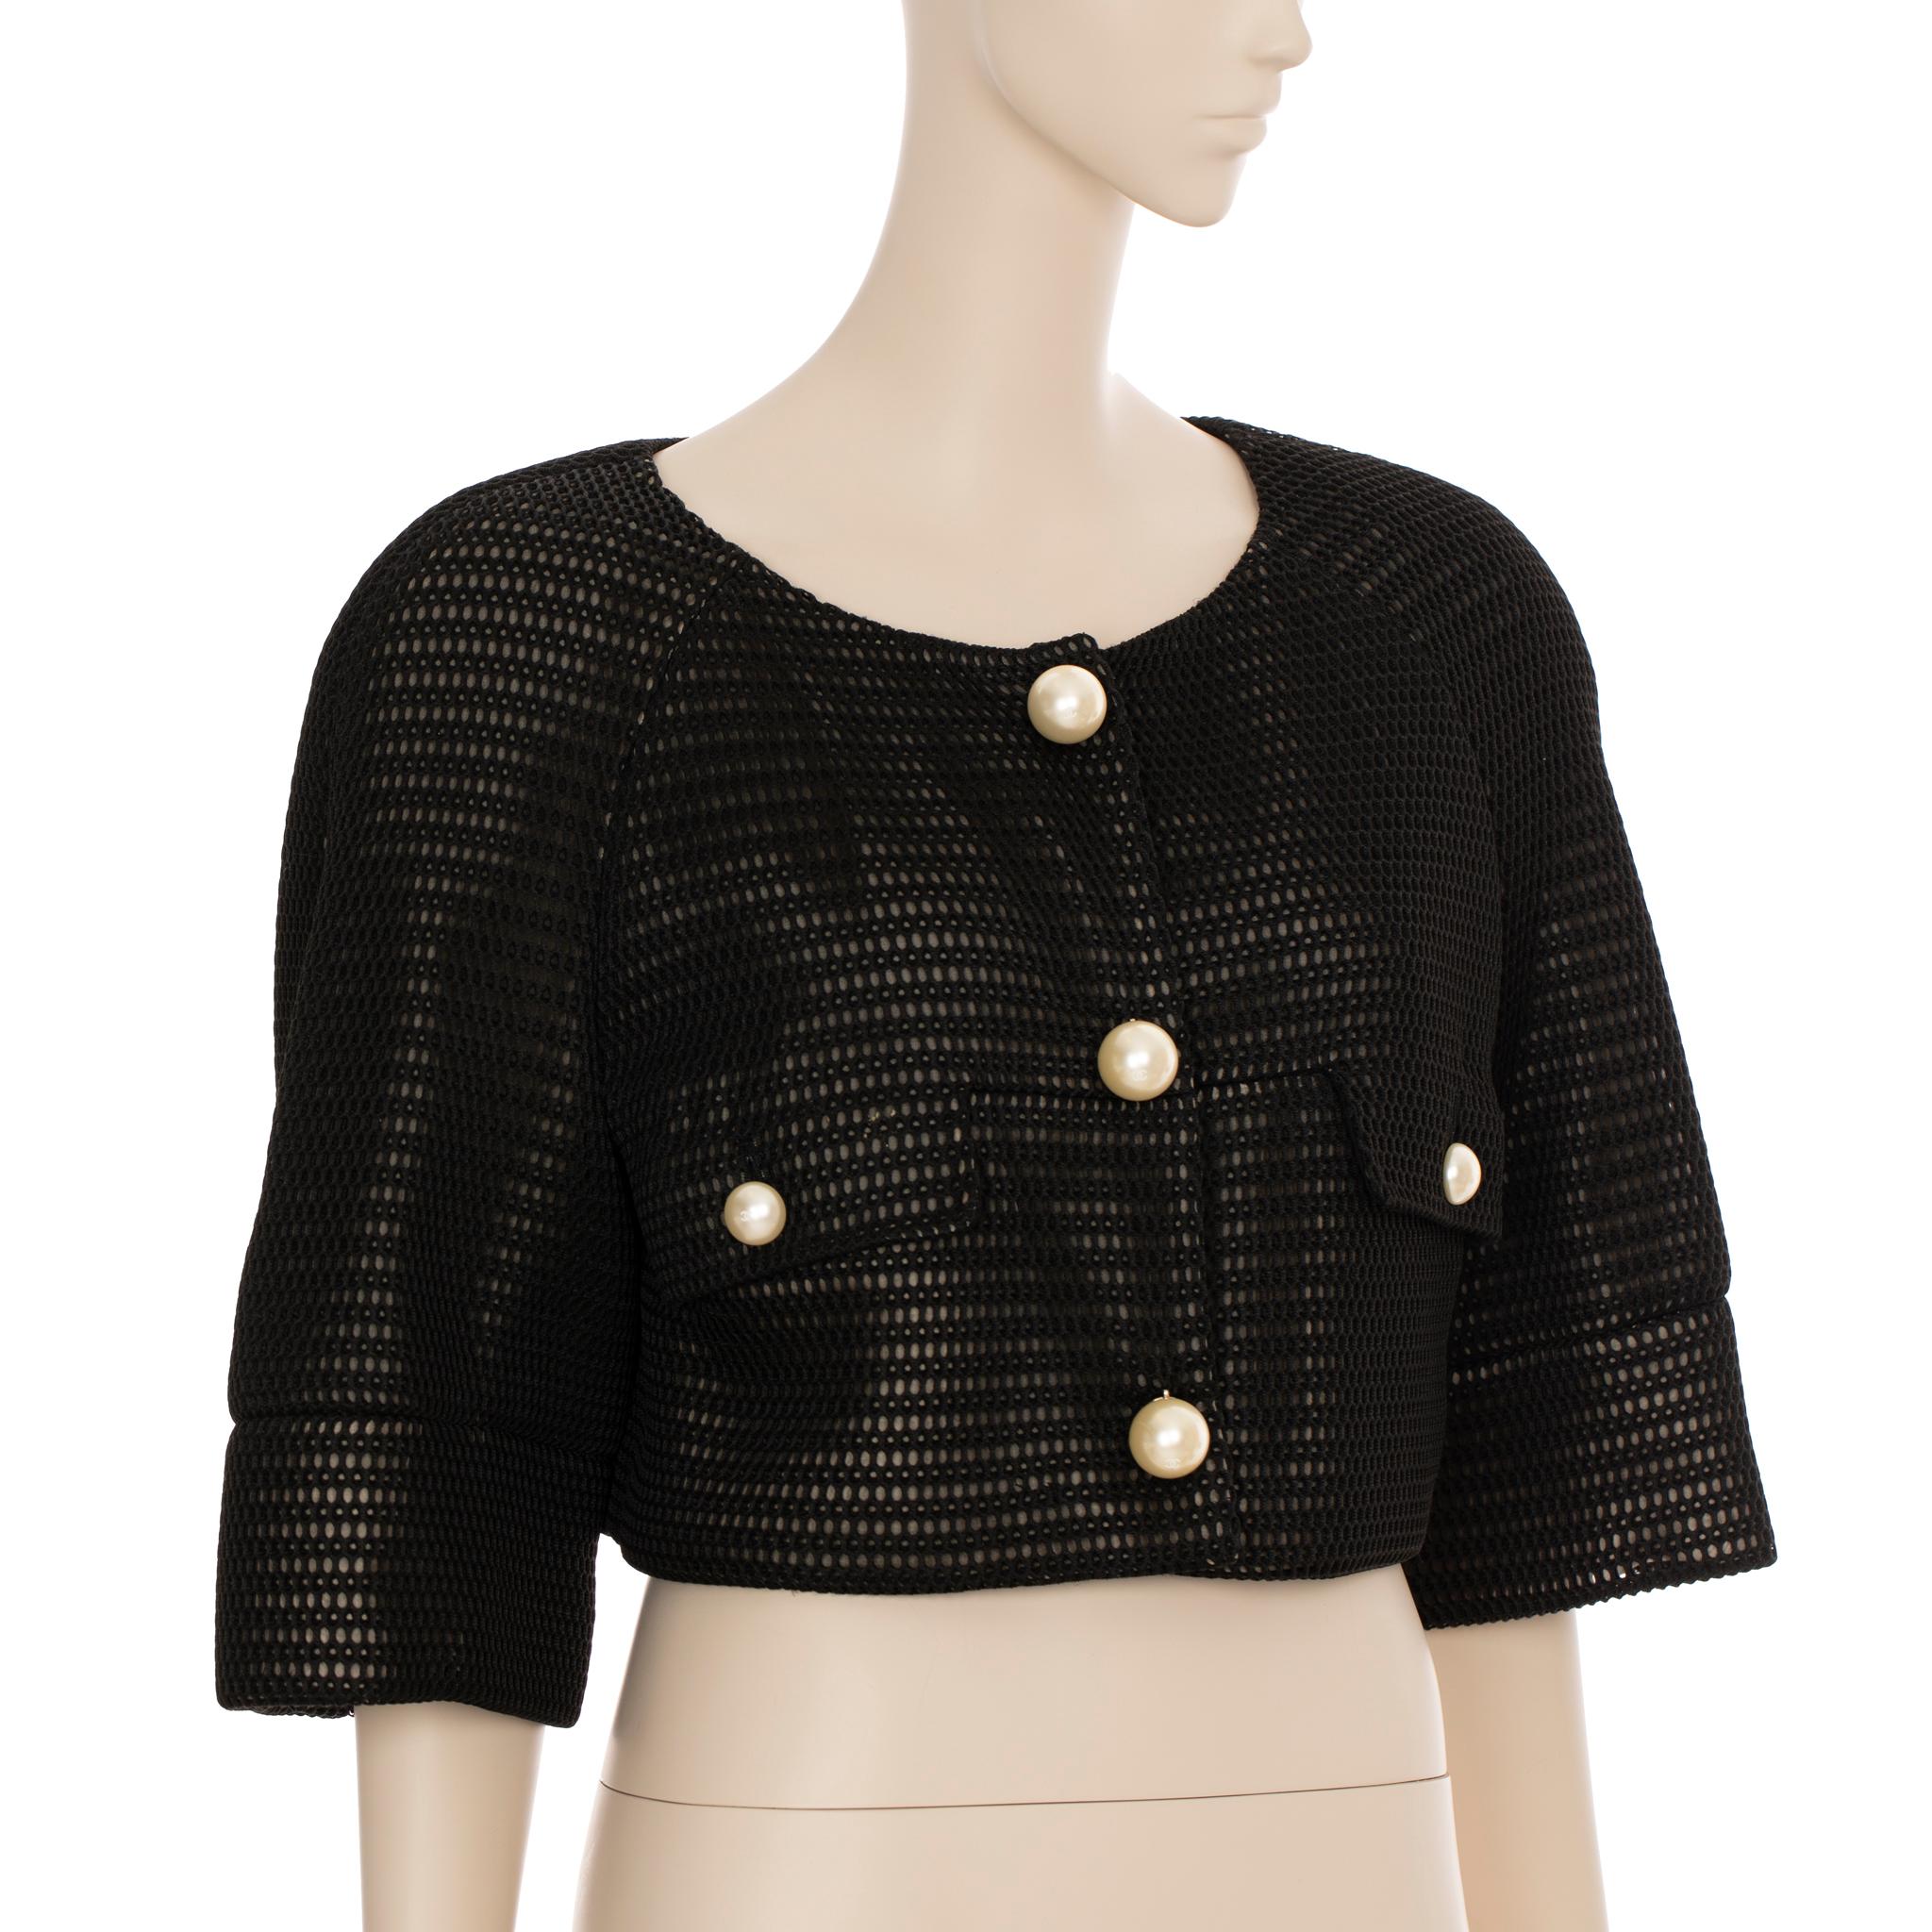 Chanel Crop Mesh Black Jacket With Faux Pearl Details 42 FR For Sale 6